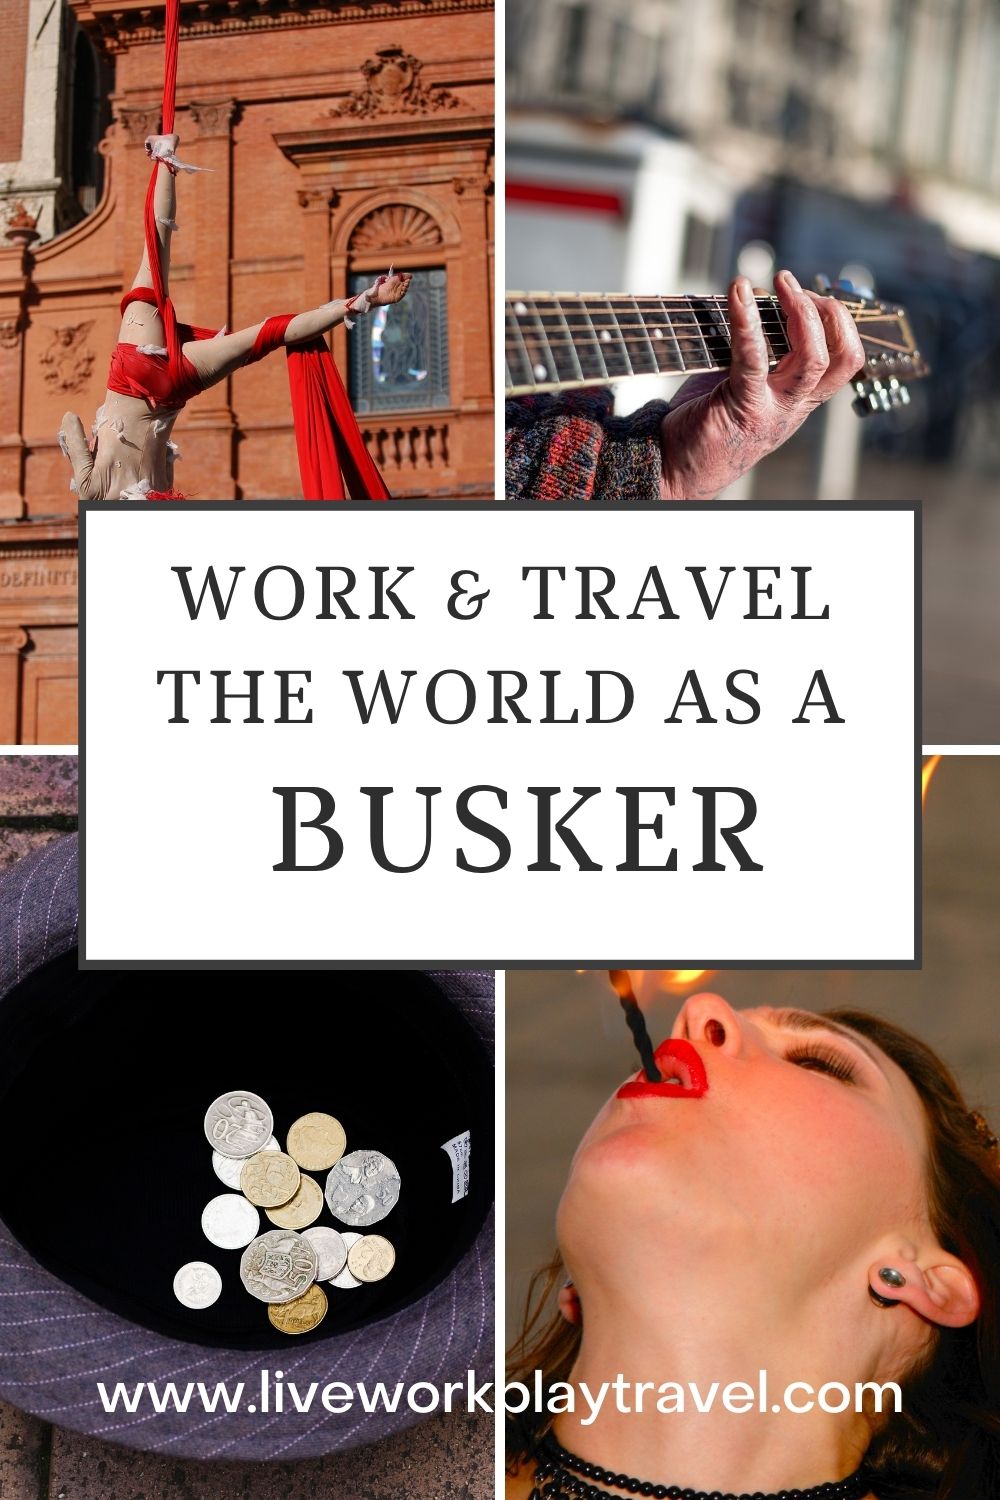 Busking or Street Performing Is A Popular Way to Work and Travel Abroad. Musicians, Acrobats And Fire Breathers Are Some of The Things You Can Do When Busking or Street Performing.